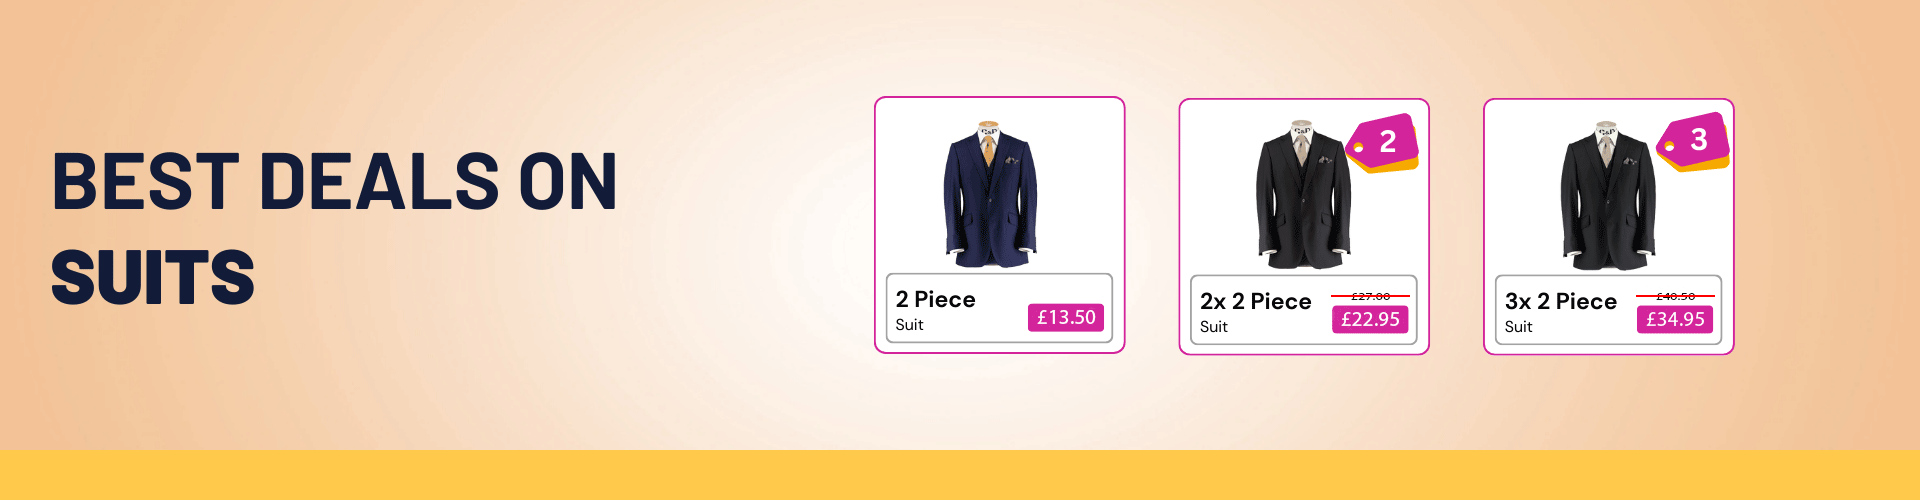 Canary Wharf Dry Cleaners Best Deals on Suits